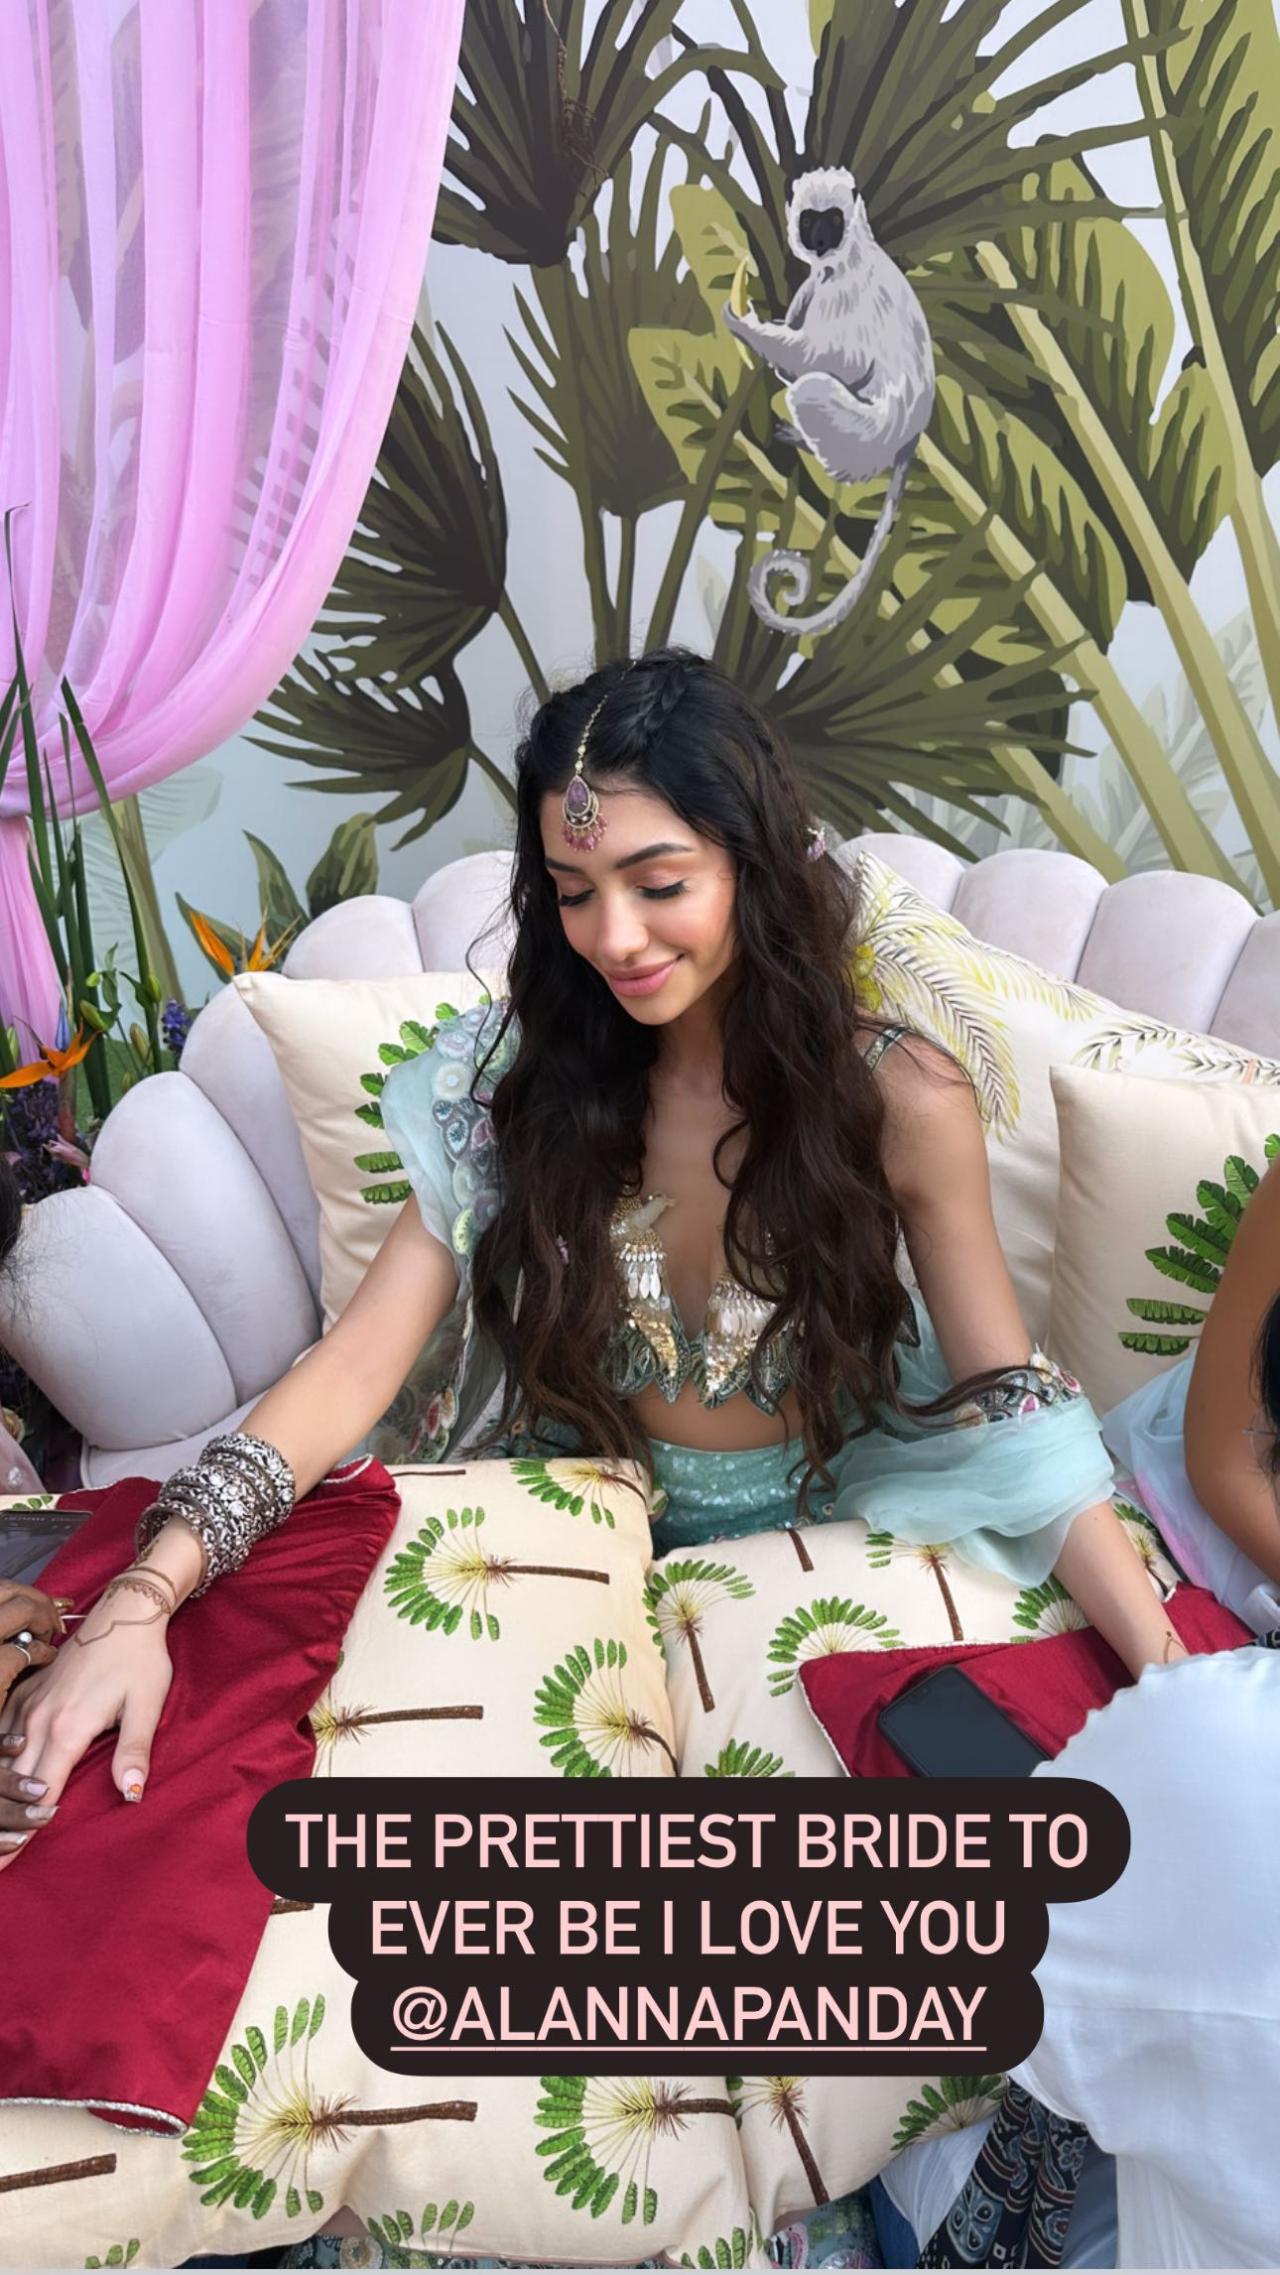 In the pictures, bride-to-be Alanna Panday can be seen dressed in a pastel mint-green floral lehenga while getting her mehendi done